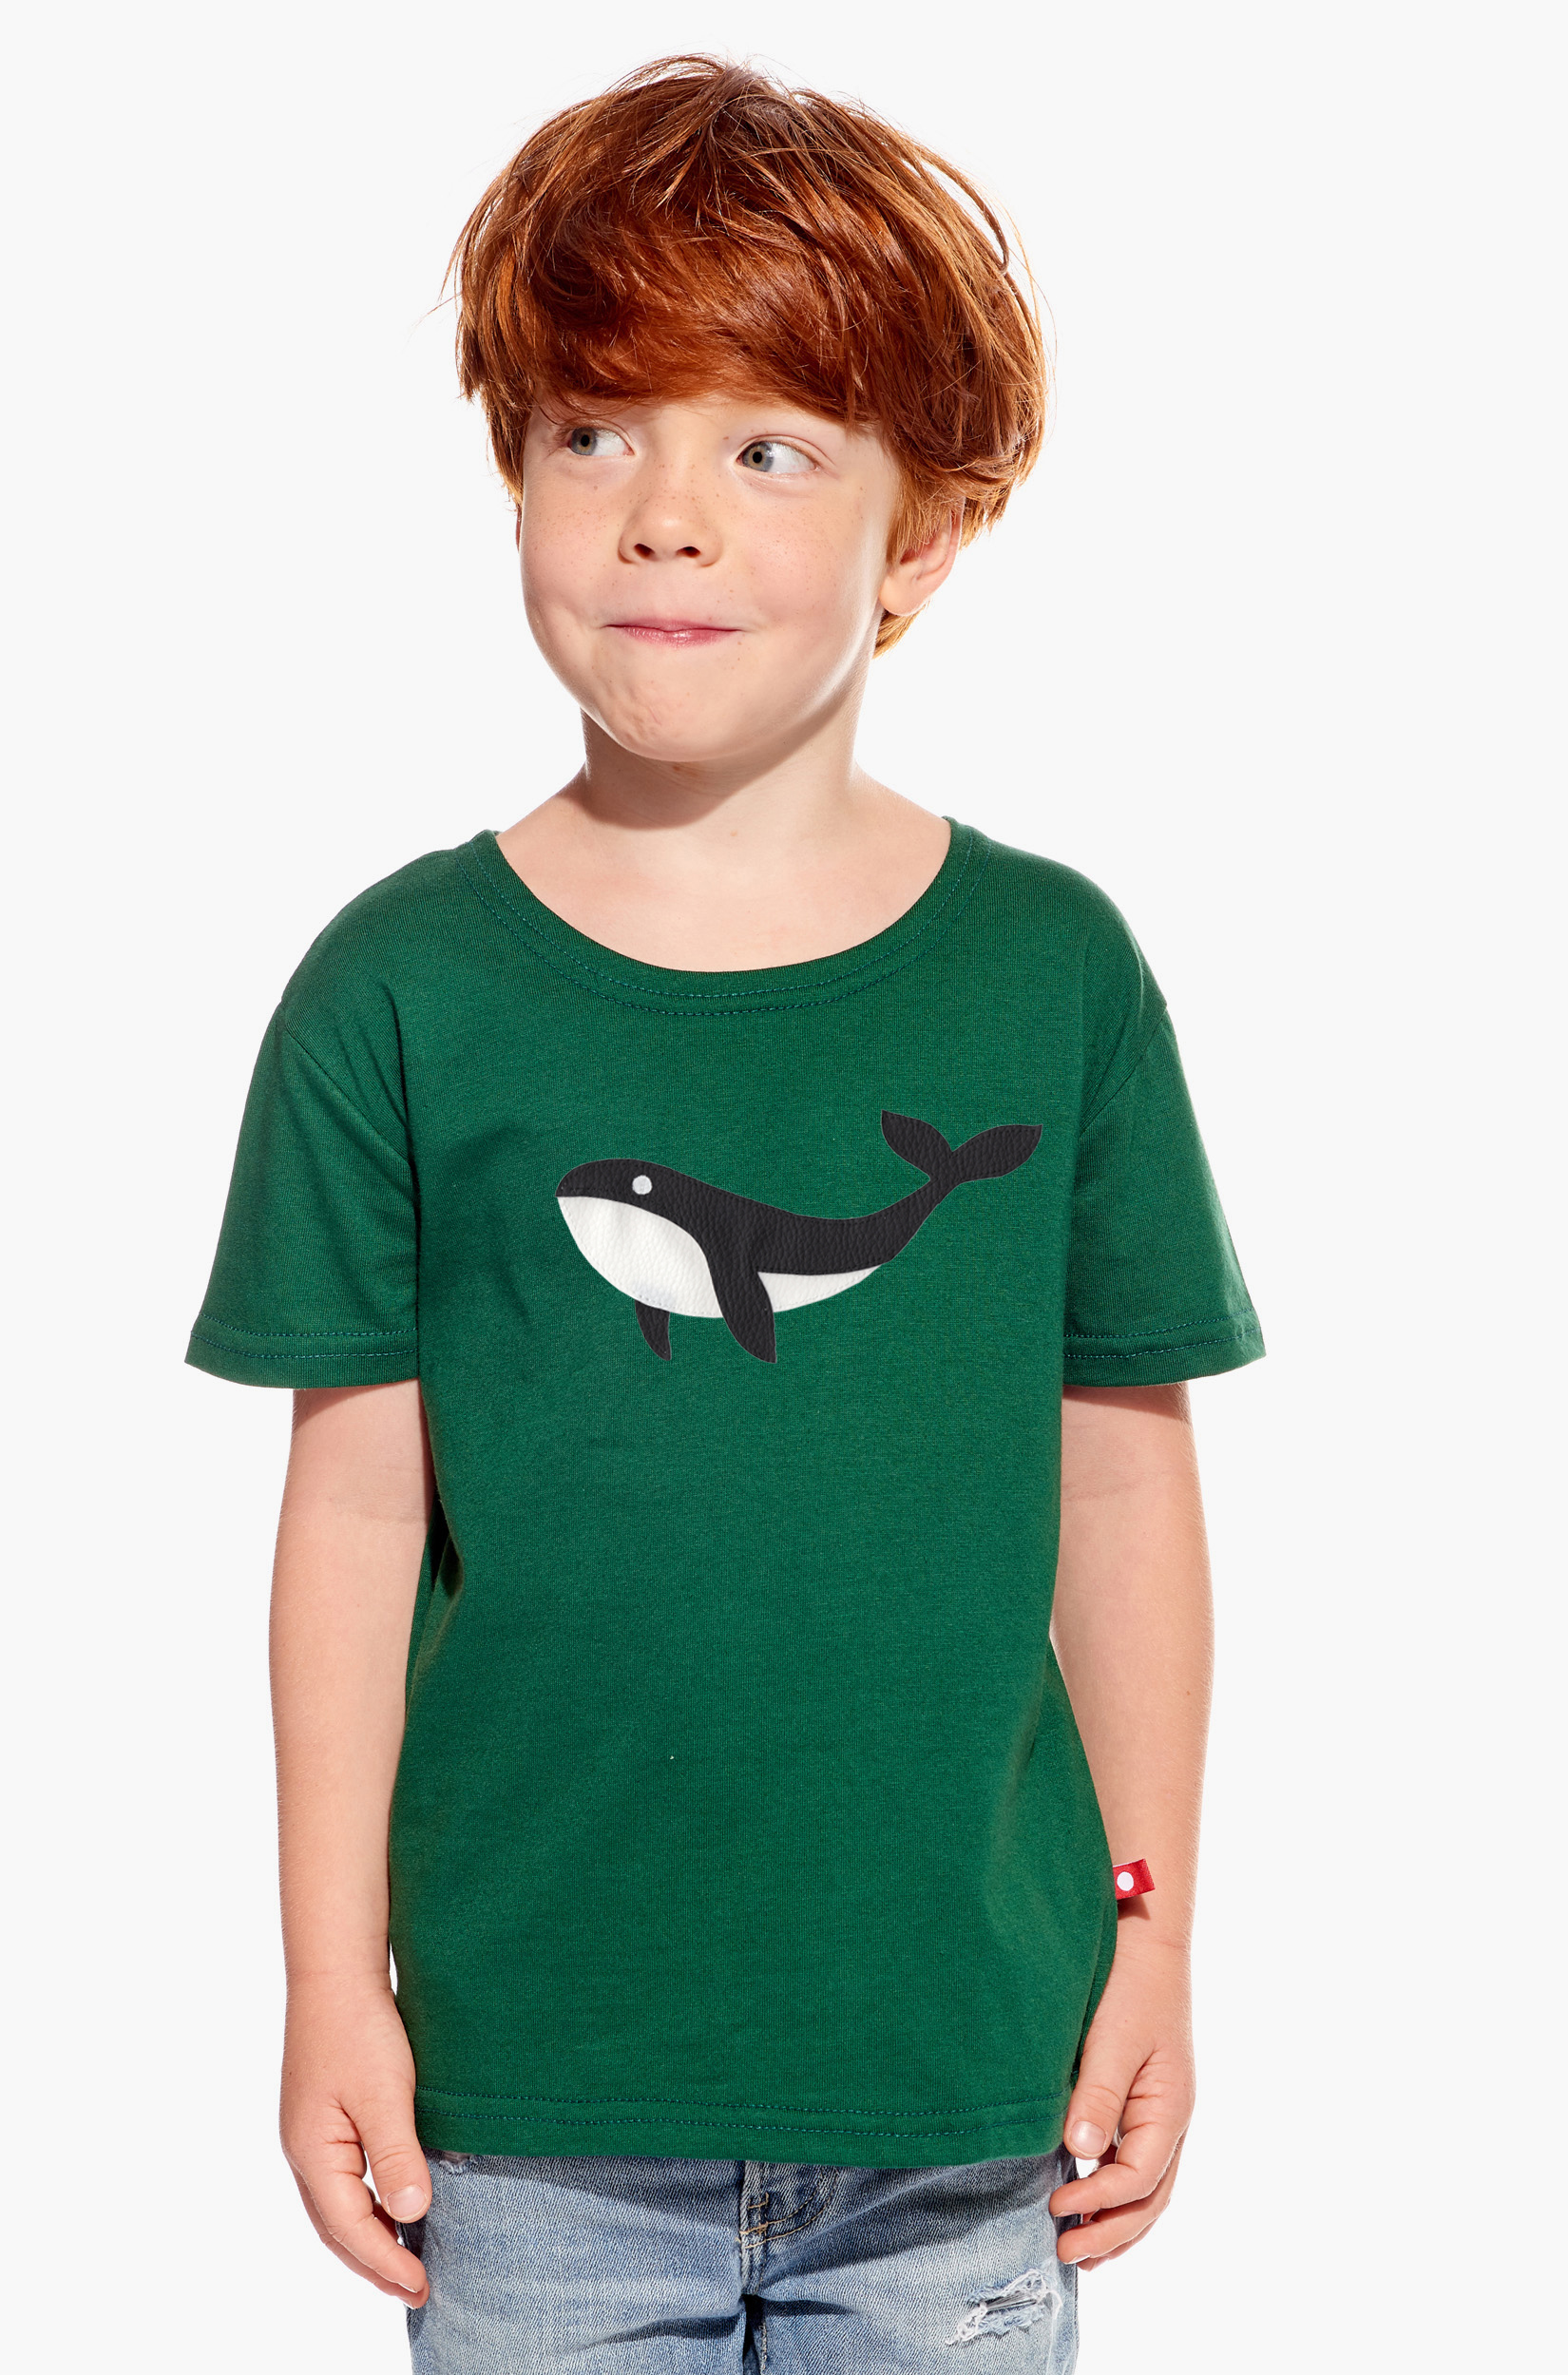 Shirt with whale